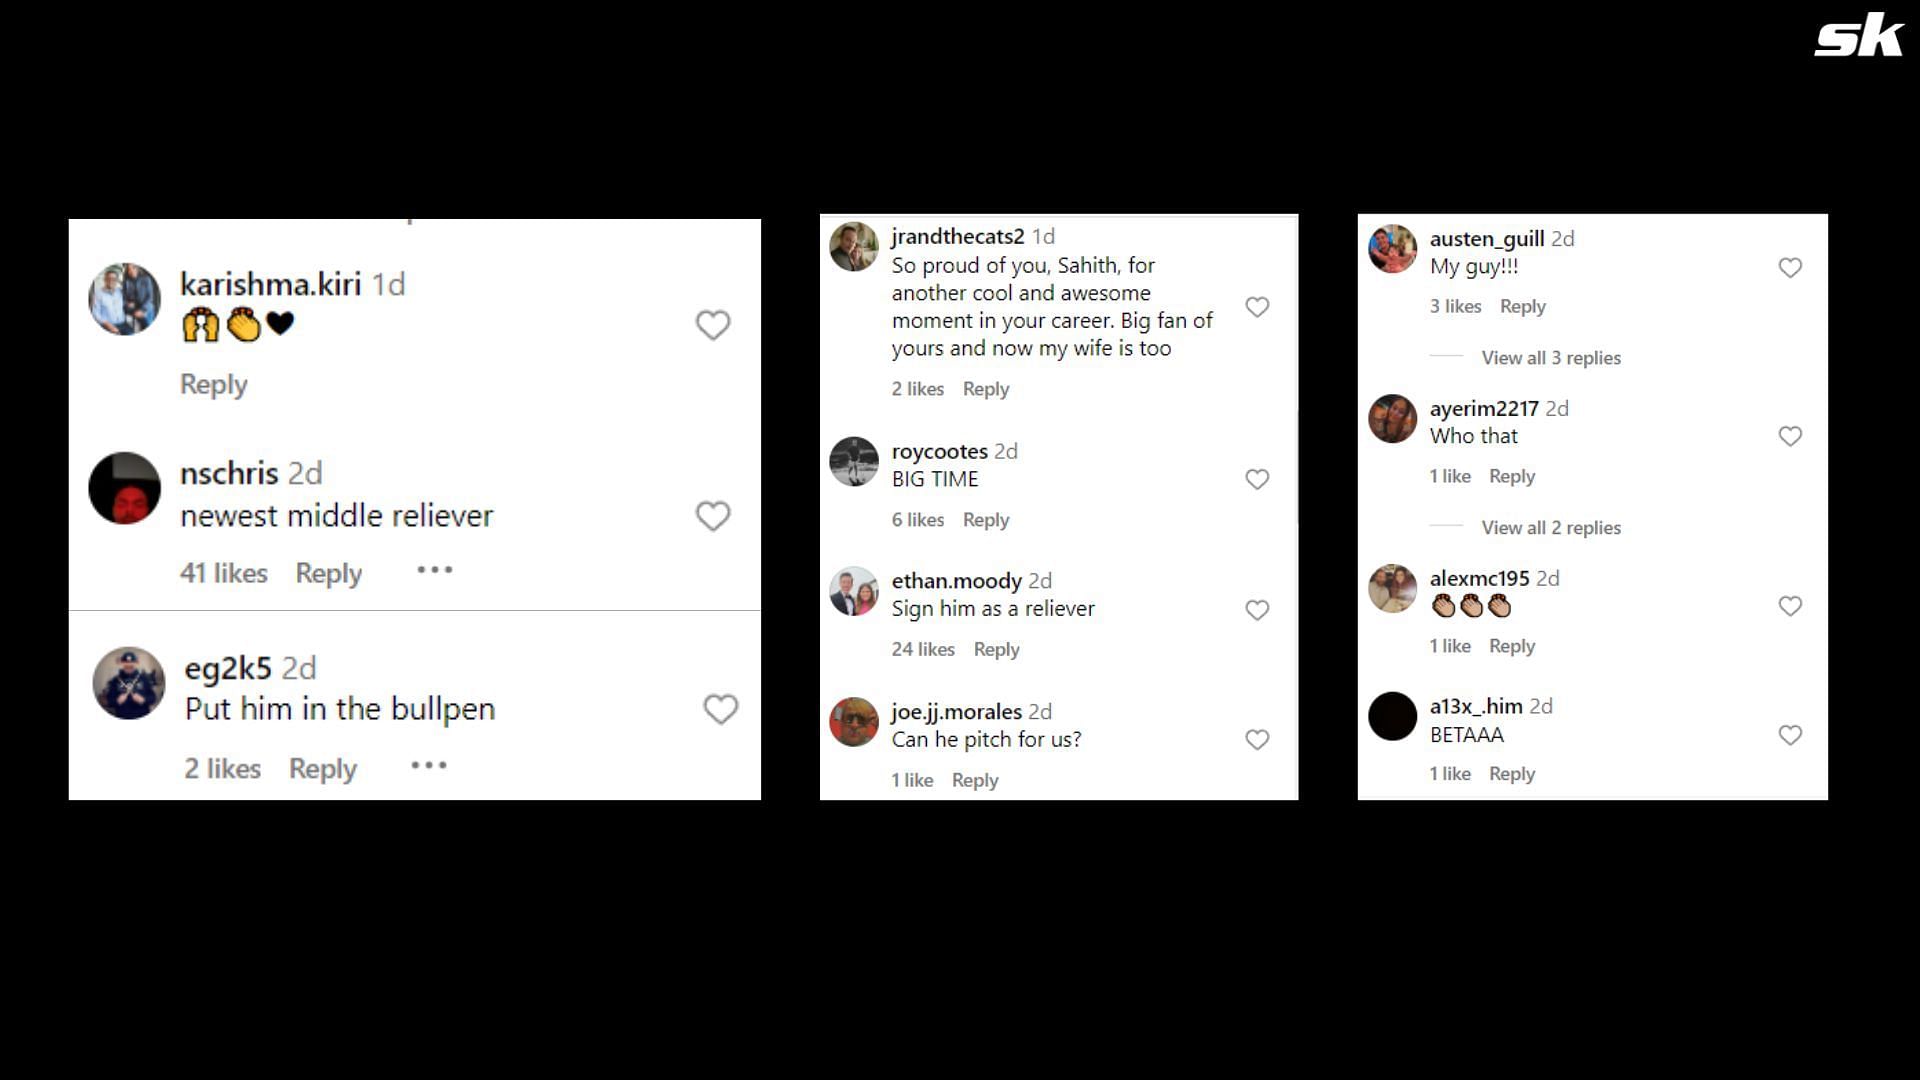 Fan reactions to Astros post from Instagram